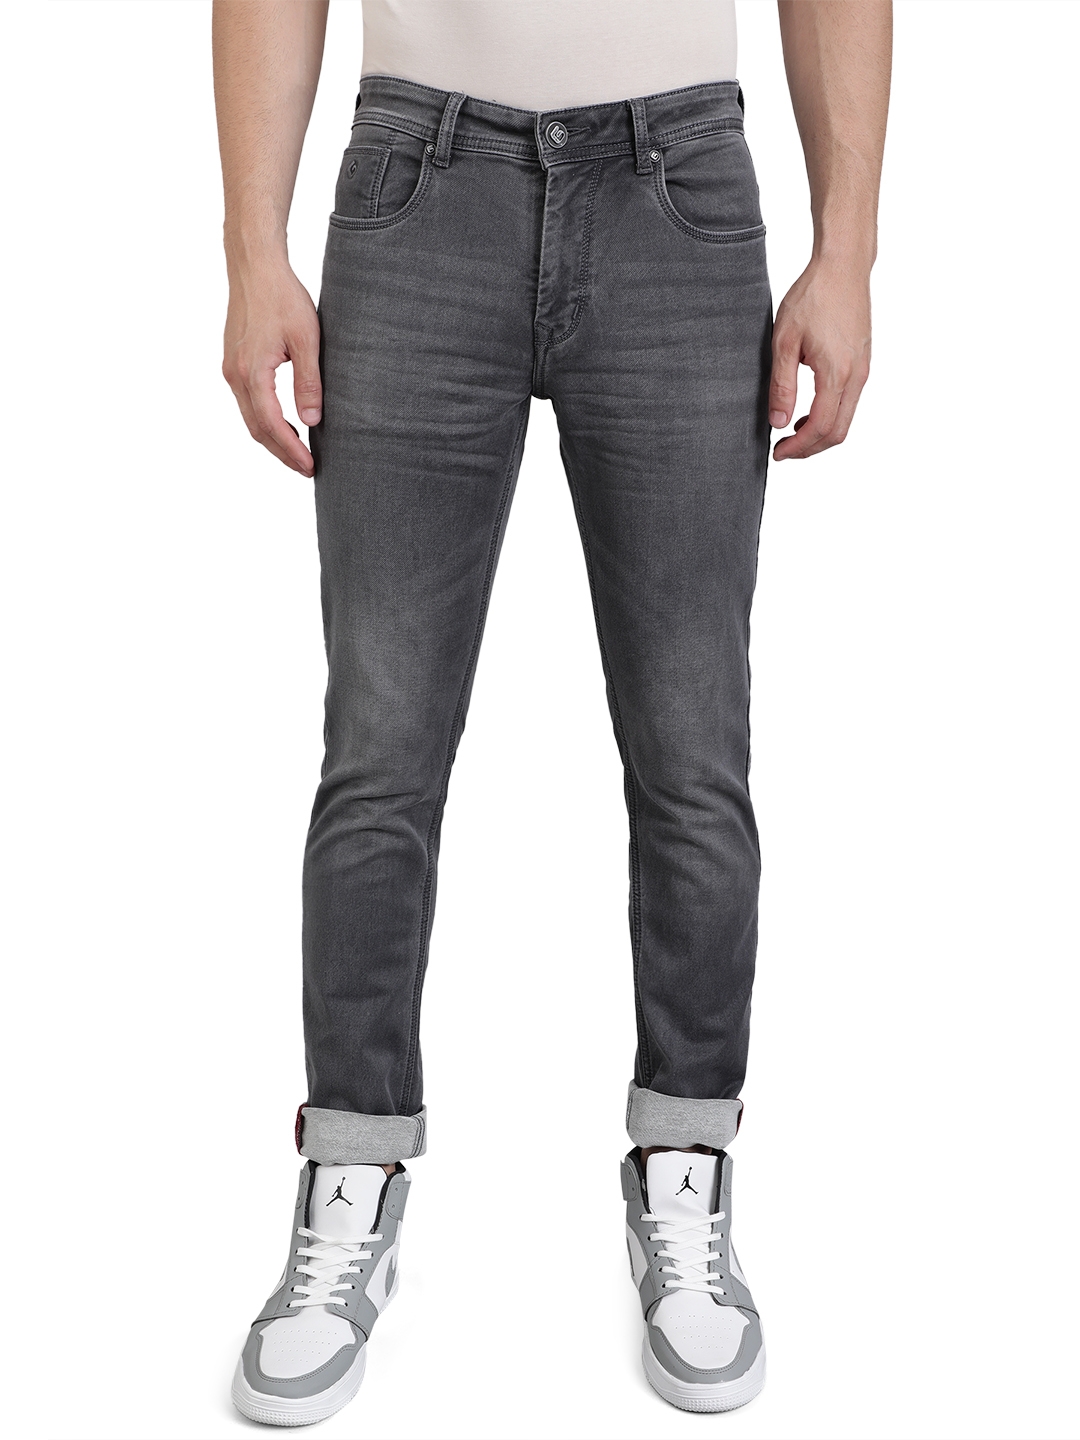 Greenfibre | Midnight Grey Washed Straight Fit Jeans | Greenfibre